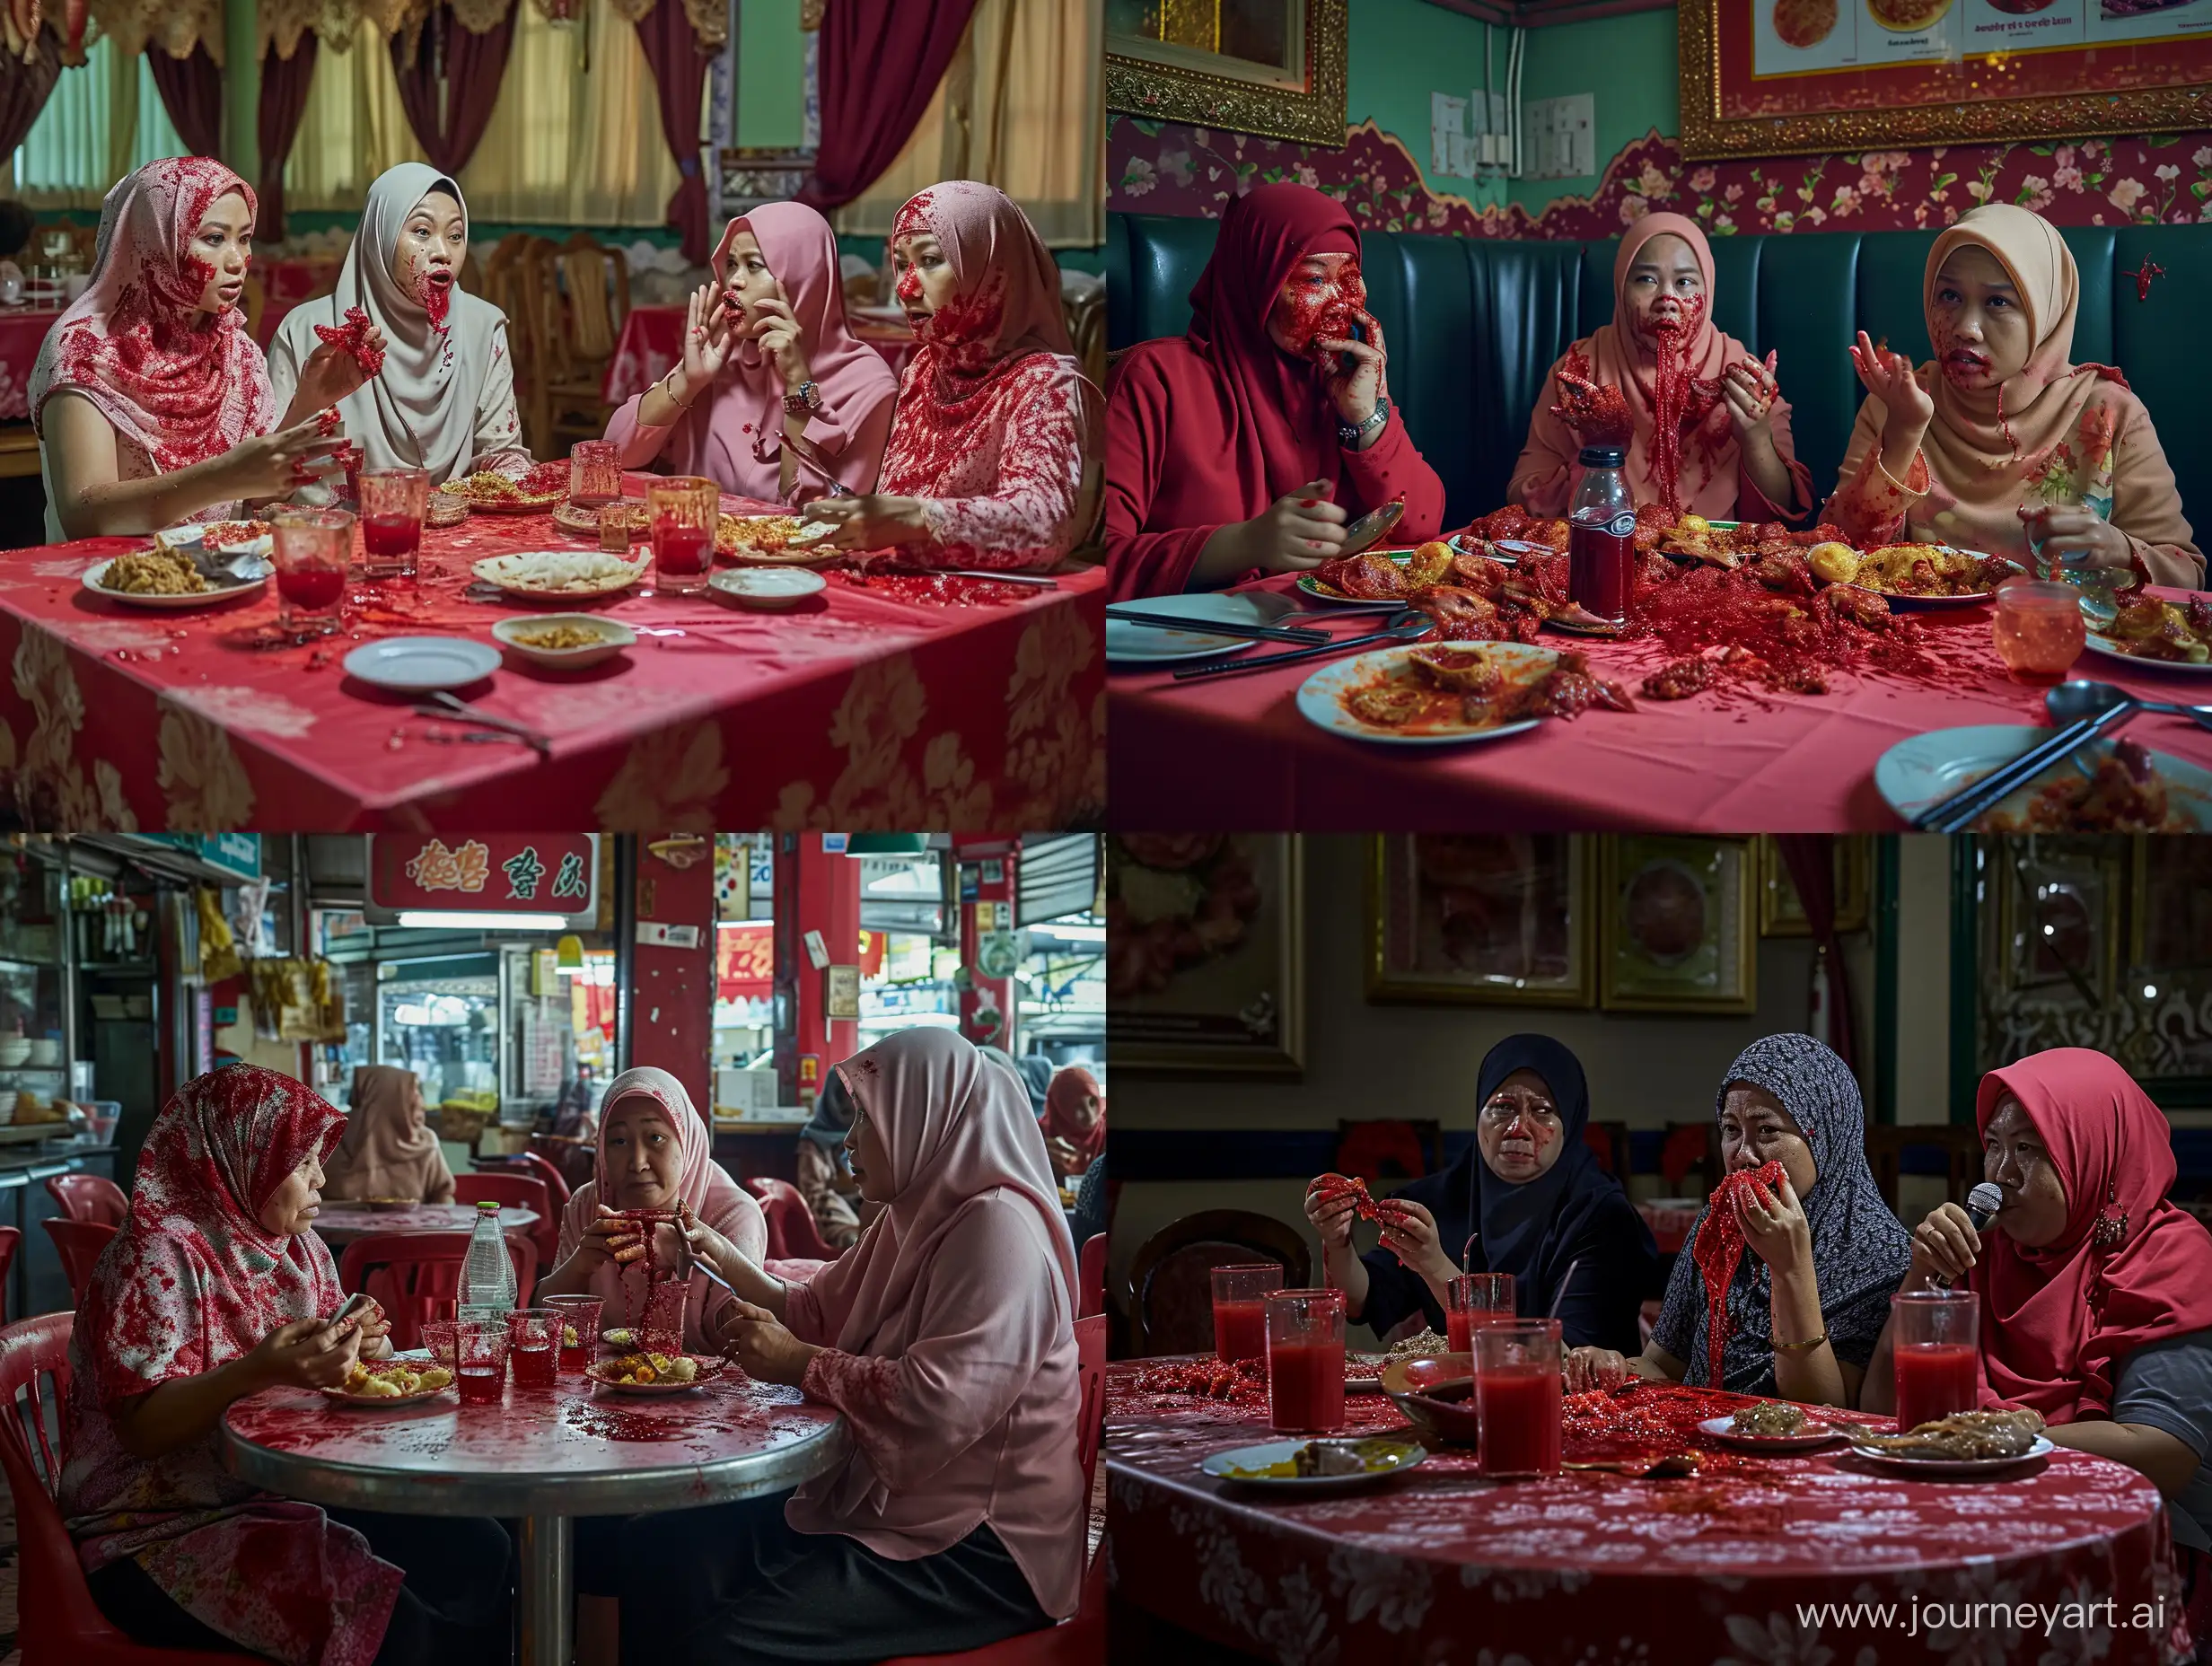 ultra realistic, some Malay women sat chatting while eating blood, malay restaurant, canon eos-id x mark iii dslr --v 6.0
